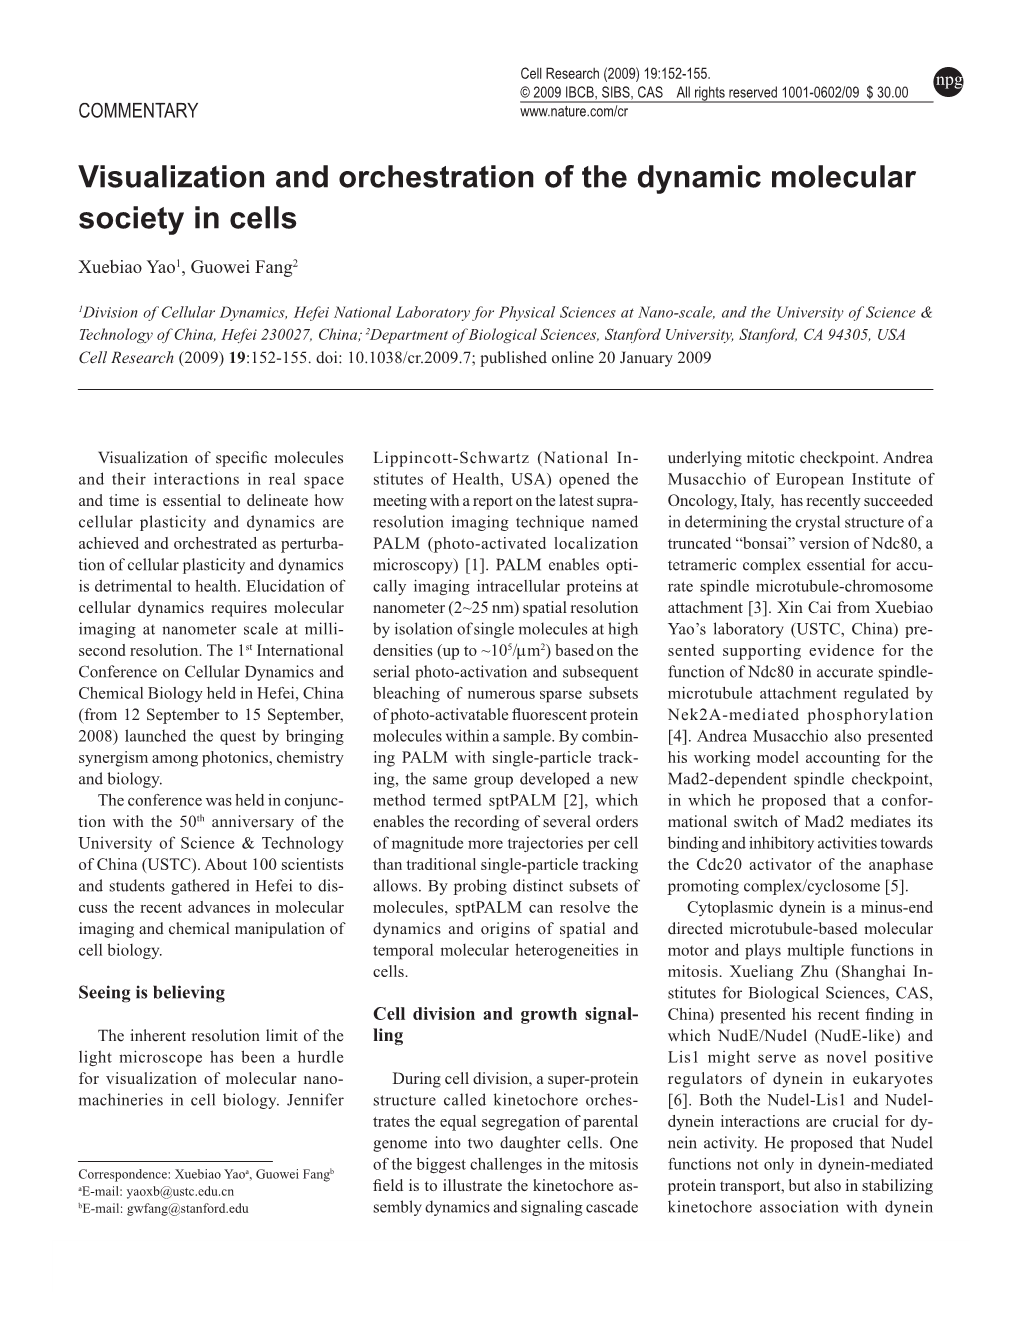 Visualization and Orchestration of the Dynamic Molecular Society in Cells